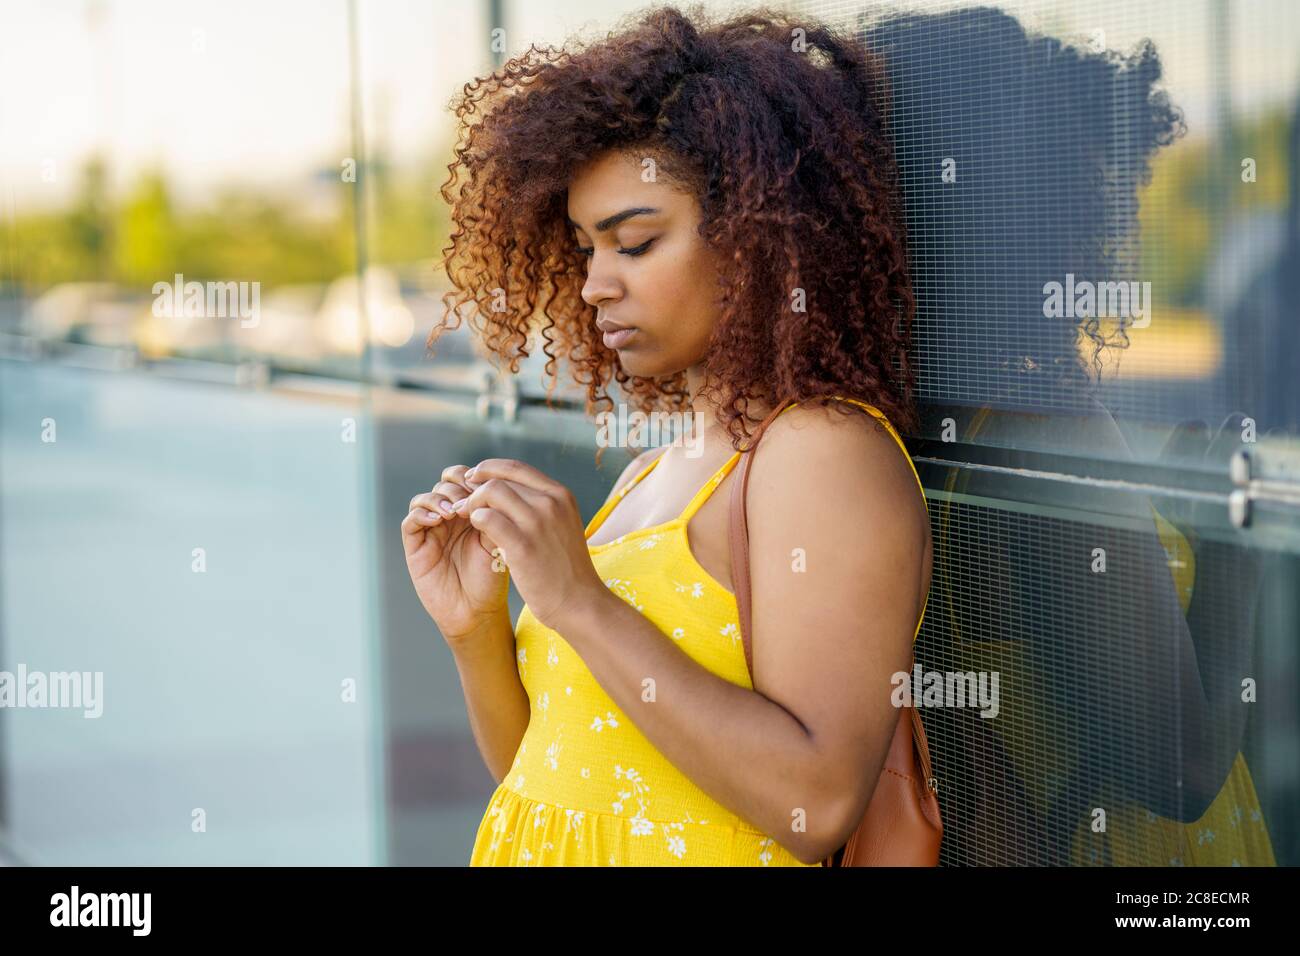 Young woman with afro hair wearing yellow dress standing by modern wall in city Stock Photo